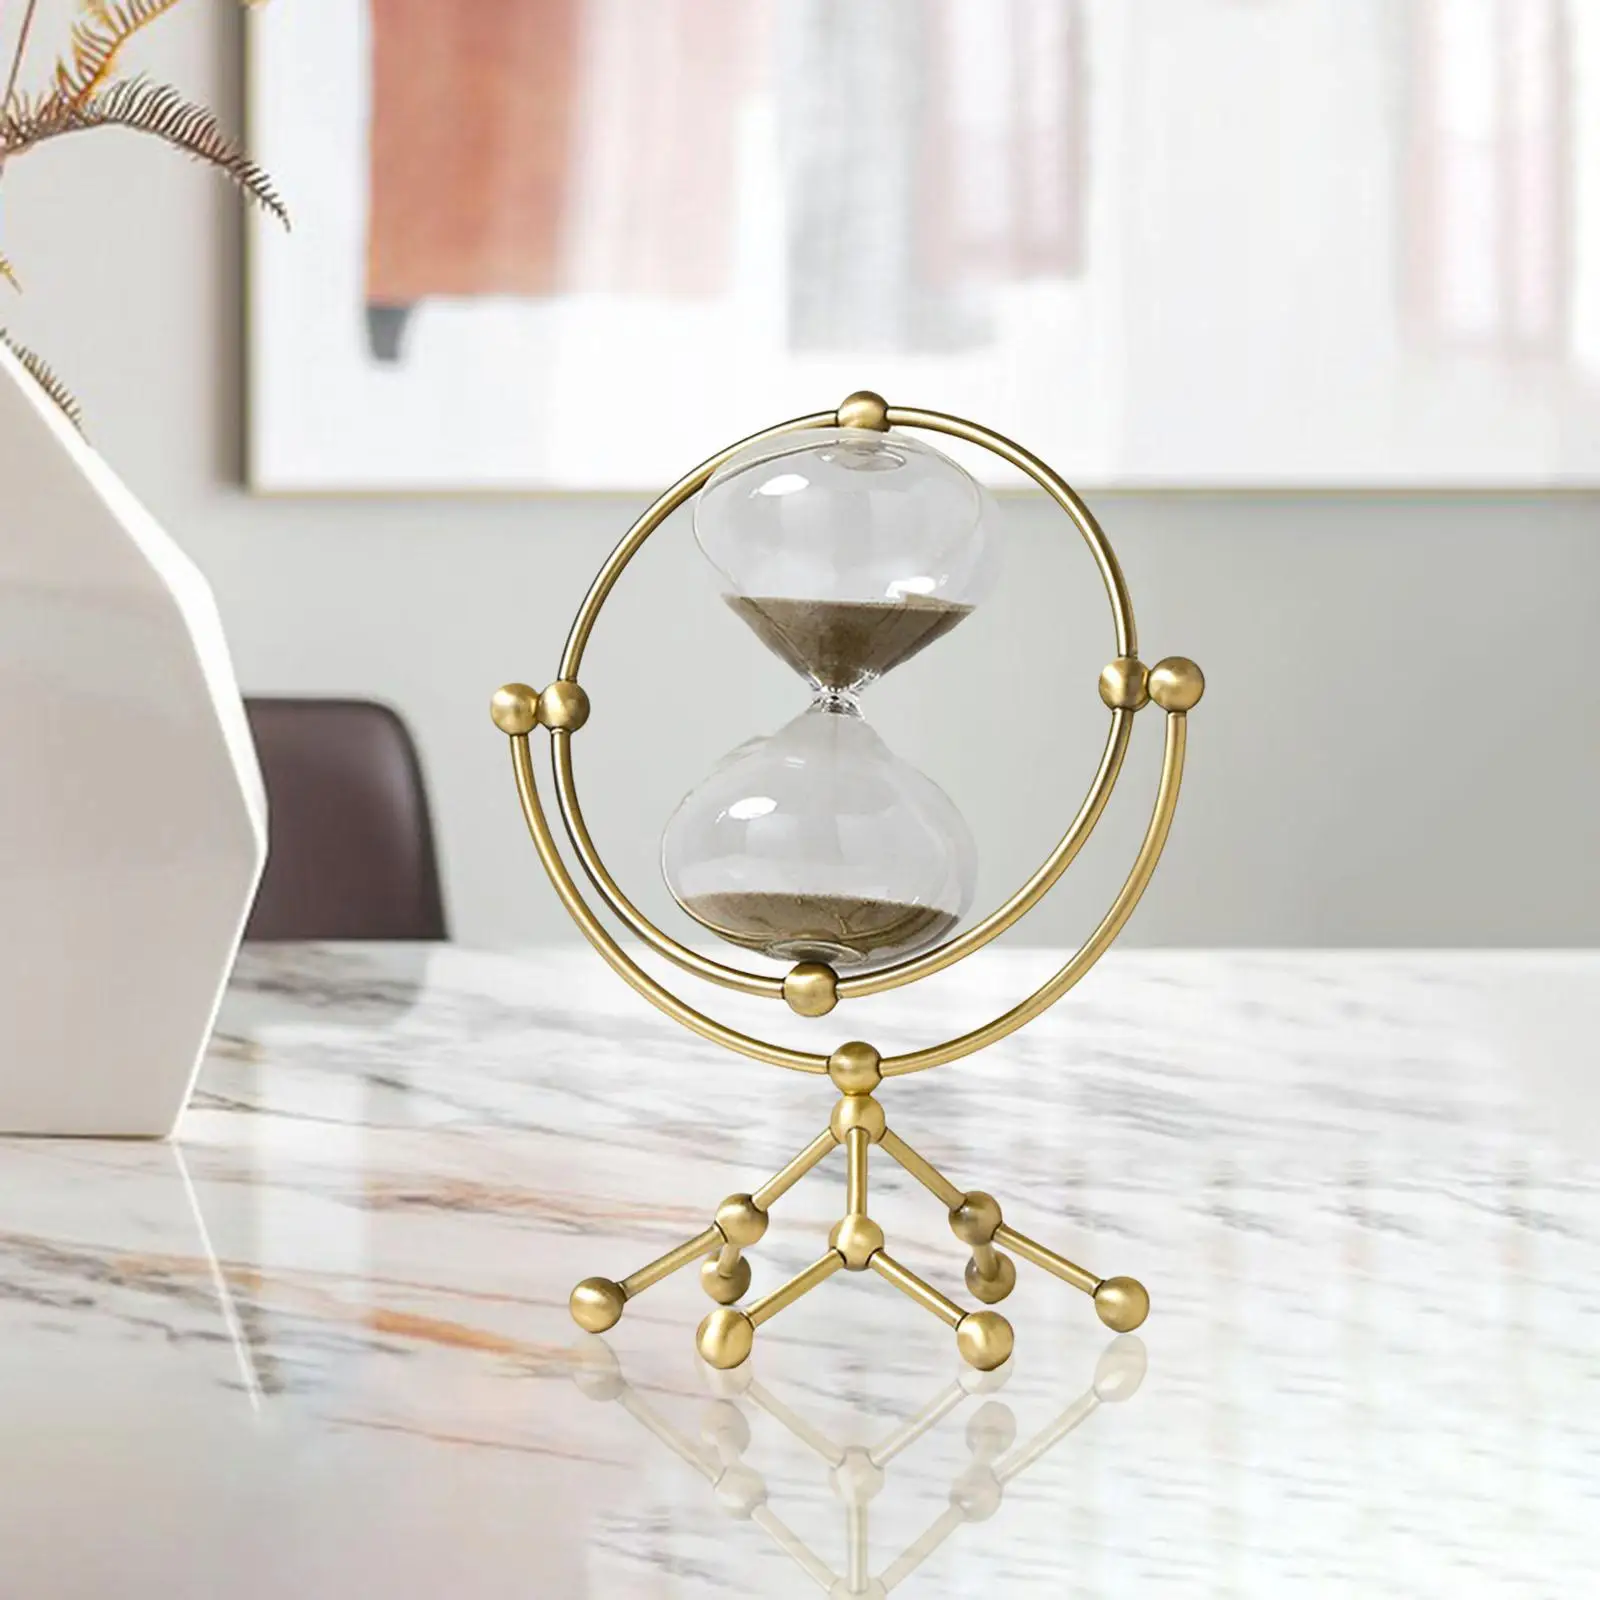 30 Minutes Hourglass Clocks Hourglass Craft Figures Vintage Creative Decorative Metal Tabletop Furniture for Office Living Room